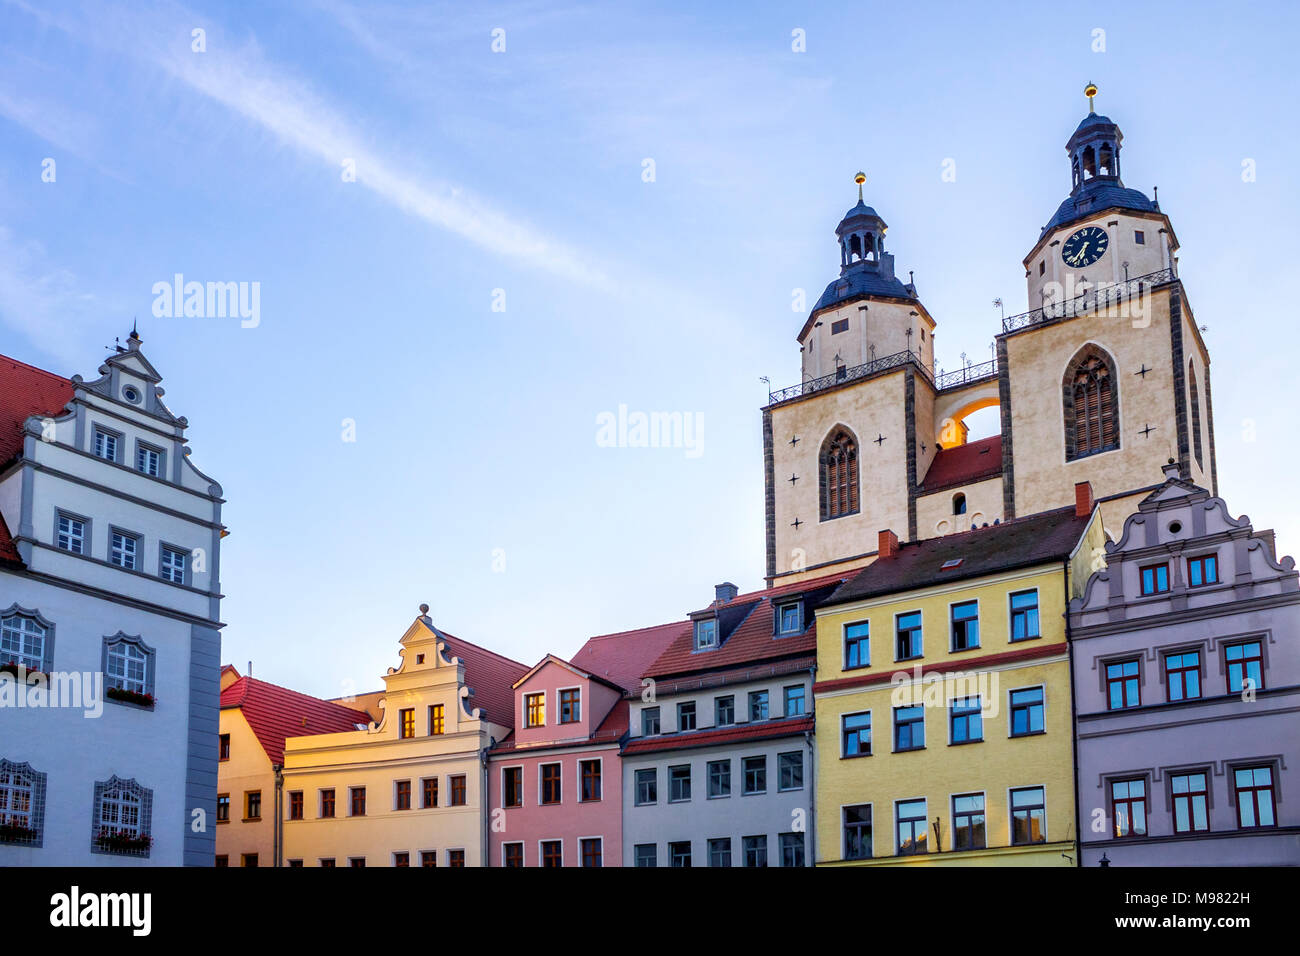 Germany, Lutherstadt Wittenberg, view to town hall, row of houses and St Mary's Church in the background Stock Photo